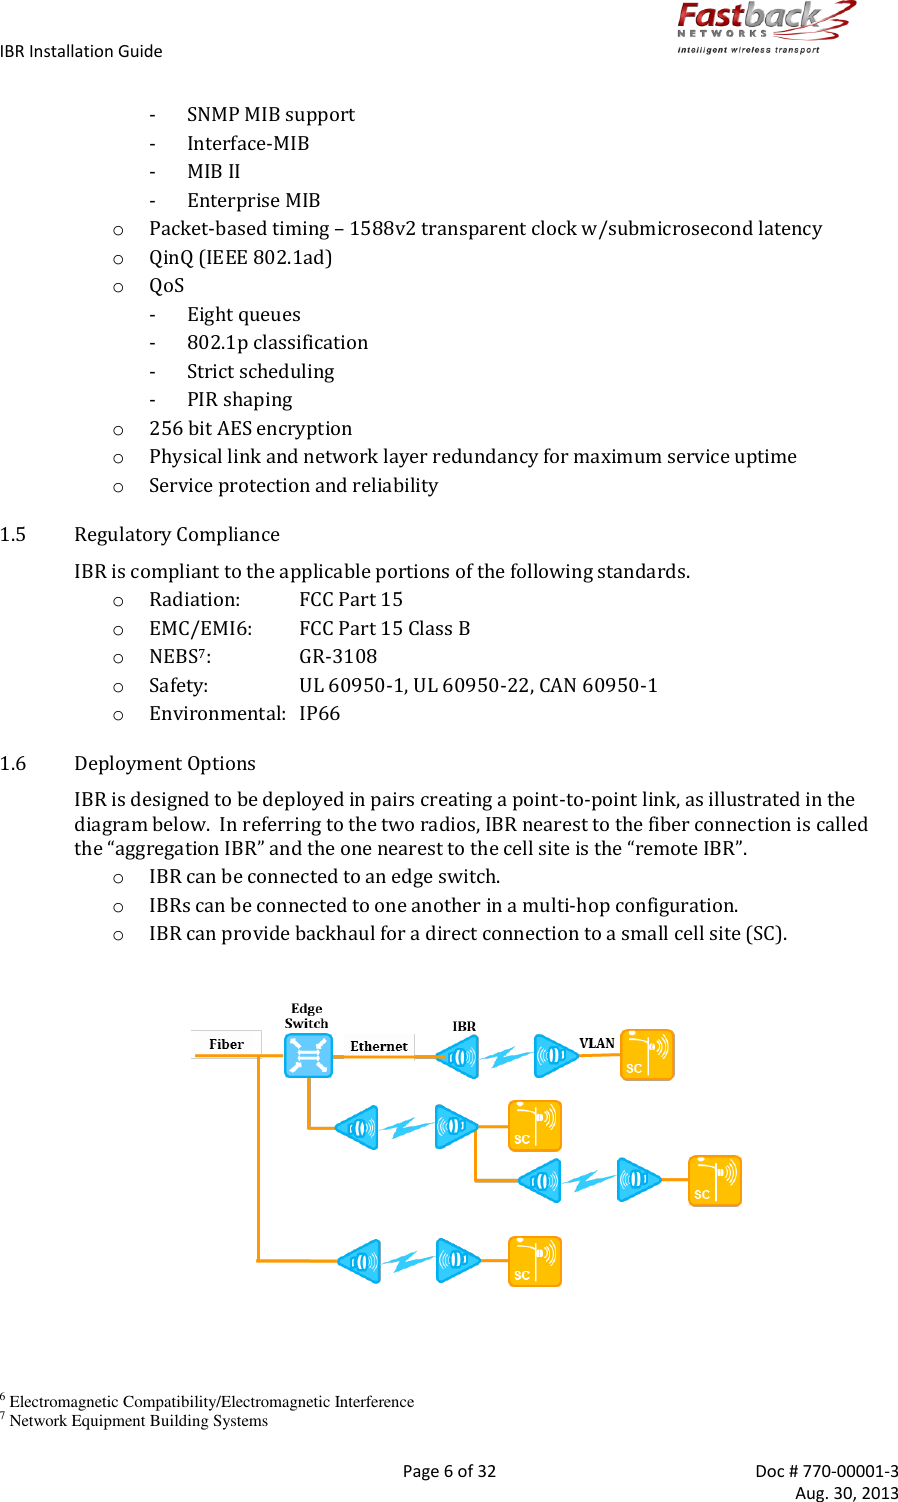 IBR Installation Guide        Page 6 of 32  Doc # 770-00001-3     Aug. 30, 2013   - SNMP MIB support - Interface-MIB - MIB II - Enterprise MIB o Packet-based timing – 1588v2 transparent clock w/submicrosecond latency o QinQ (IEEE 802.1ad) o QoS - Eight queues - 802.1p classification - Strict scheduling - PIR shaping o 256 bit AES encryption o Physical link and network layer redundancy for maximum service uptime o Service protection and reliability 1.5 Regulatory Compliance IBR is compliant to the applicable portions of the following standards. o Radiation:  FCC Part 15 o EMC/EMI6:  FCC Part 15 Class B o NEBS7:  GR-3108 o Safety:  UL 60950-1, UL 60950-22, CAN 60950-1 o Environmental:  IP66 1.6 Deployment Options IBR is designed to be deployed in pairs creating a point-to-point link, as illustrated in the diagram below.  In referring to the two radios, IBR nearest to the fiber connection is called the “aggregation IBR” and the one nearest to the cell site is the “remote IBR”. o IBR can be connected to an edge switch. o IBRs can be connected to one another in a multi-hop configuration. o IBR can provide backhaul for a direct connection to a small cell site (SC).                               6 Electromagnetic Compatibility/Electromagnetic Interference 7 Network Equipment Building Systems 